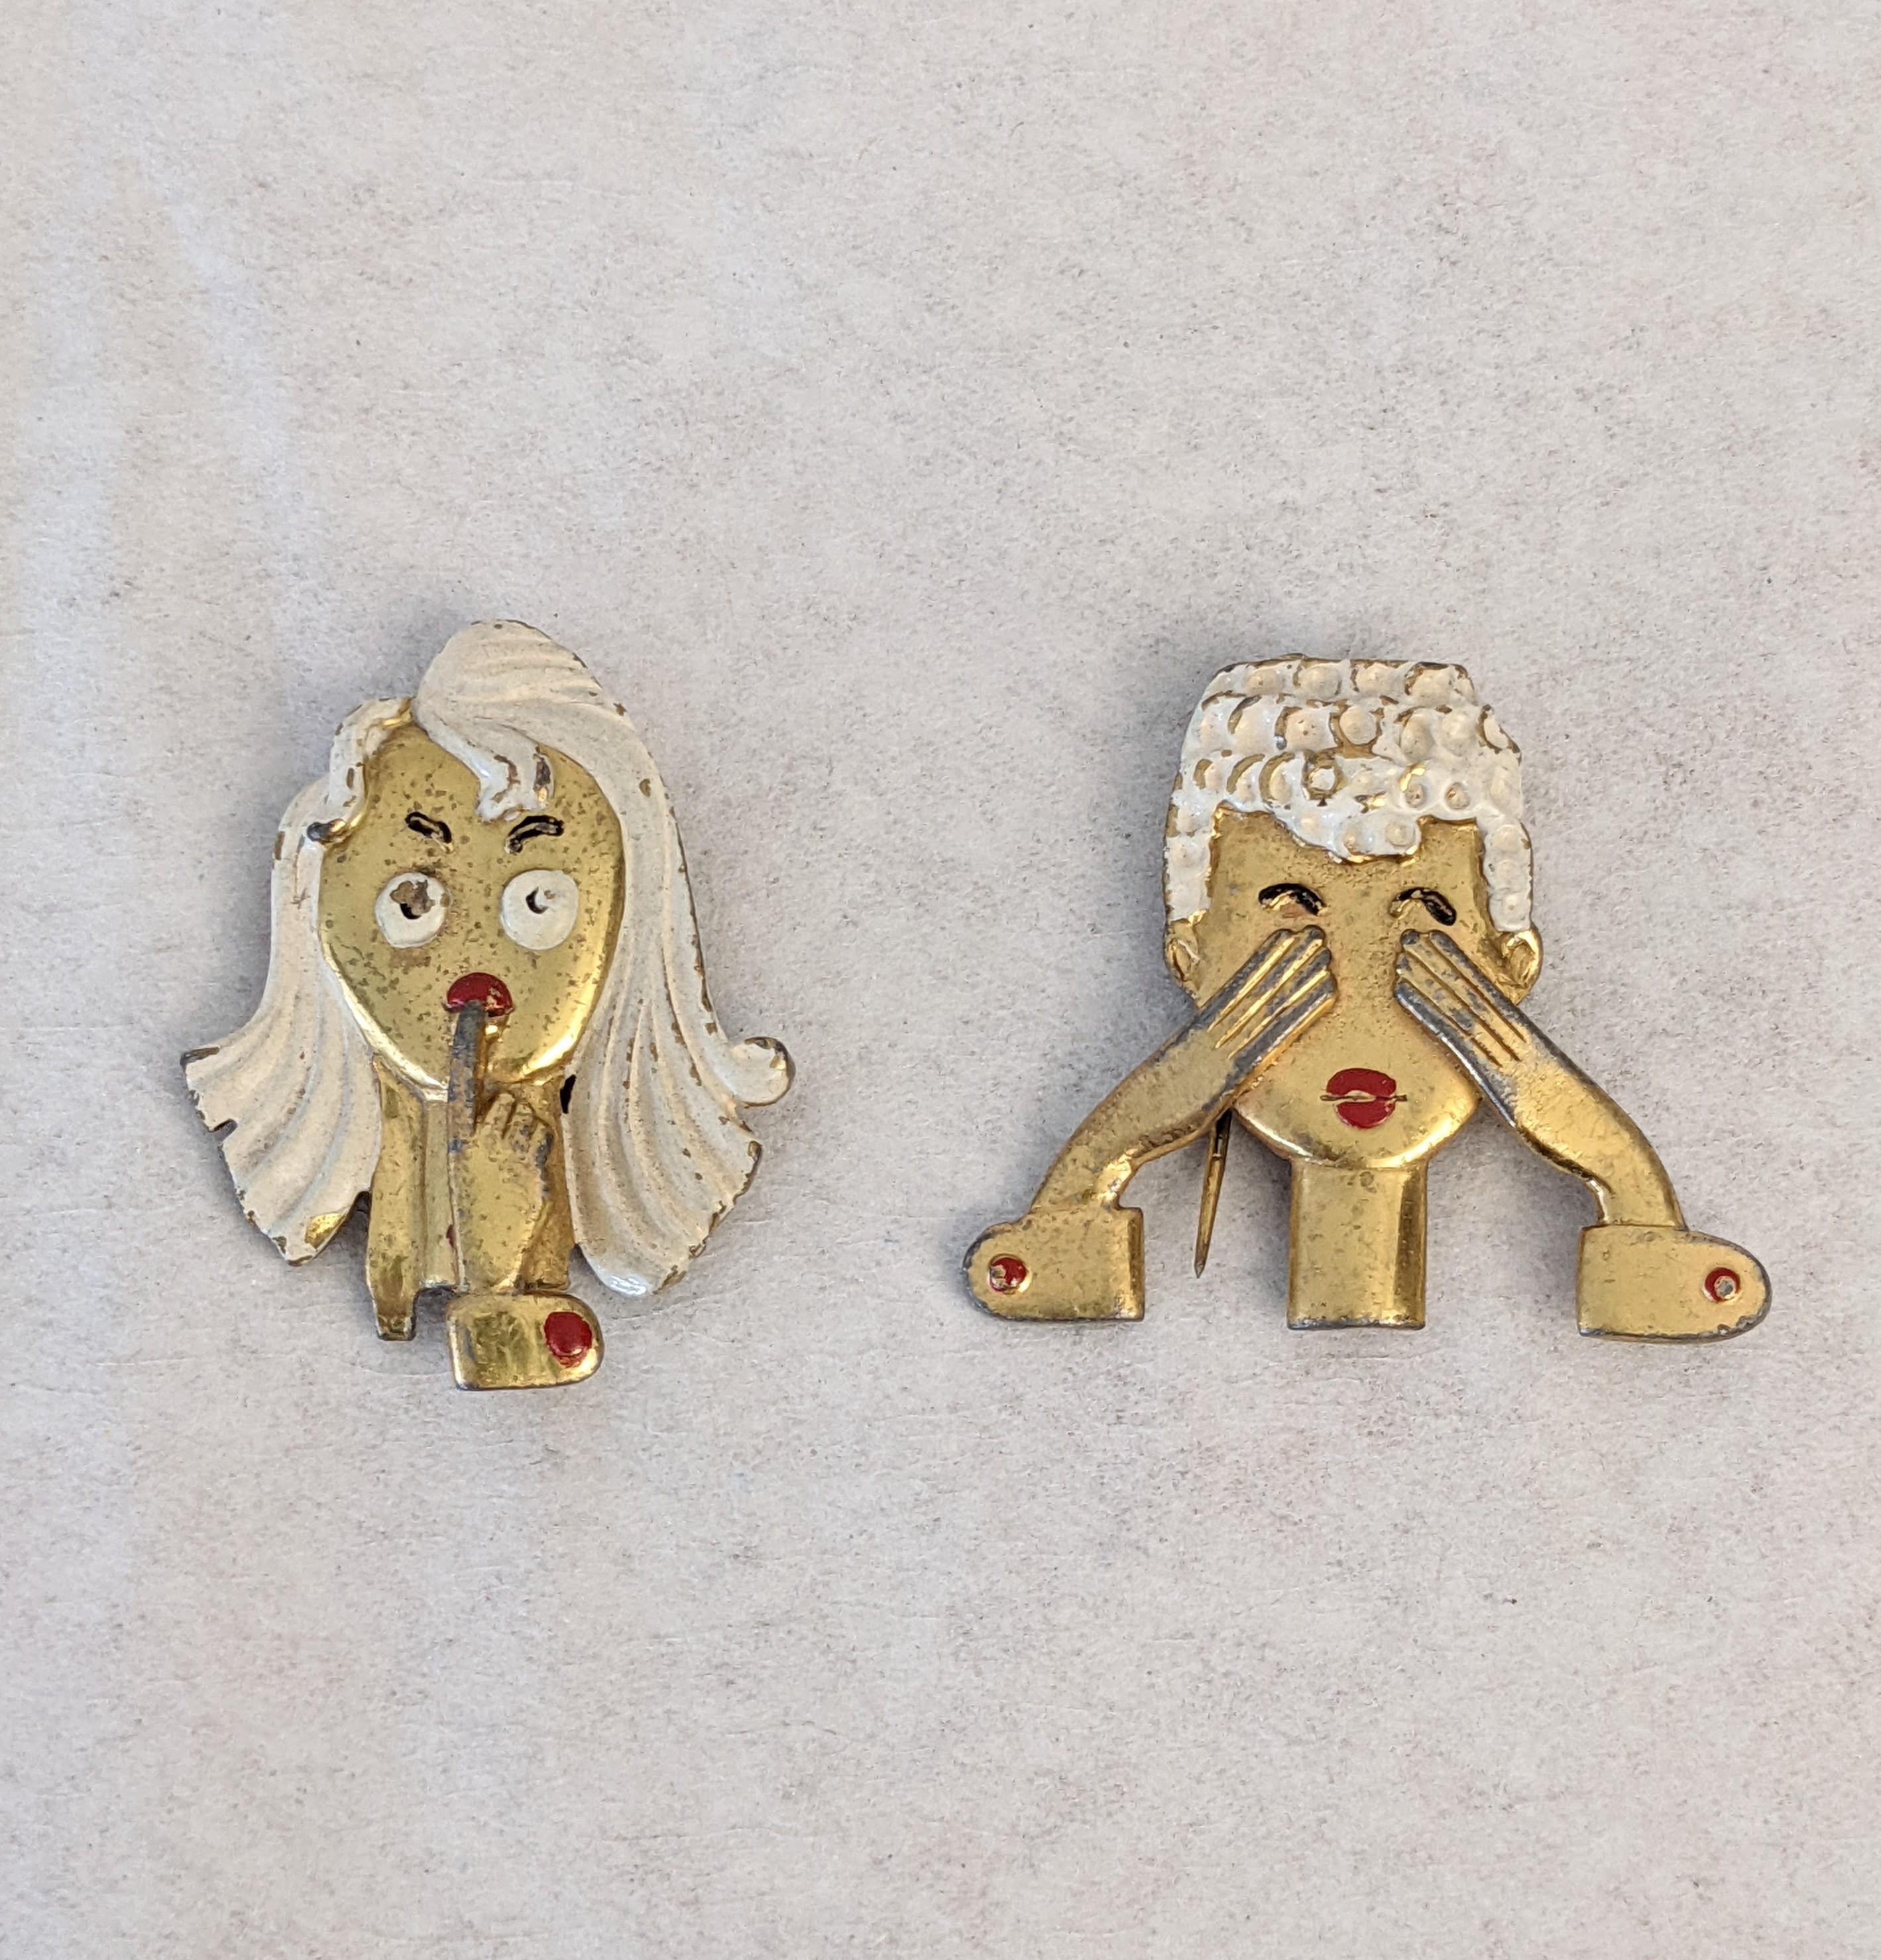 Charming Art Deco clip brooches depicting a couple 